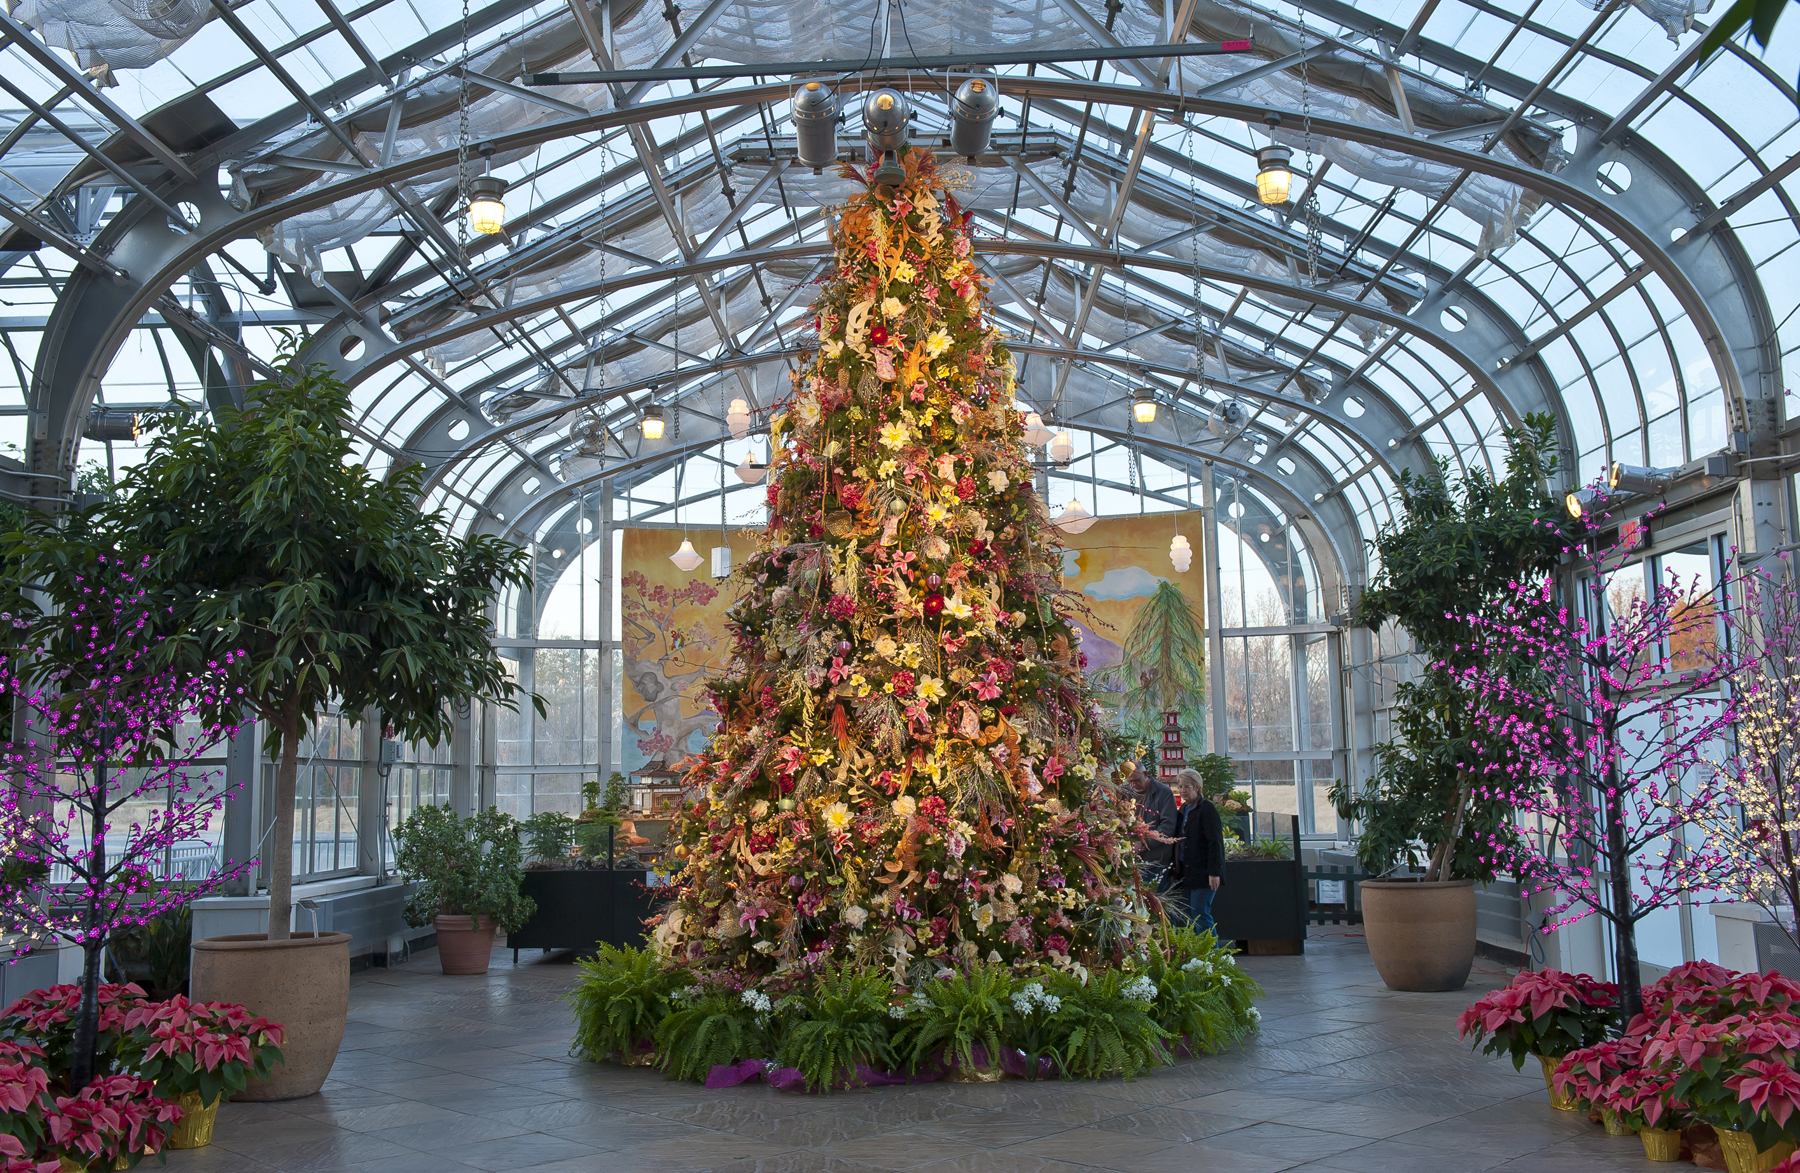 Top 5 Tips For Holiday Tree Trimming Lewis Ginter Botanical Garden